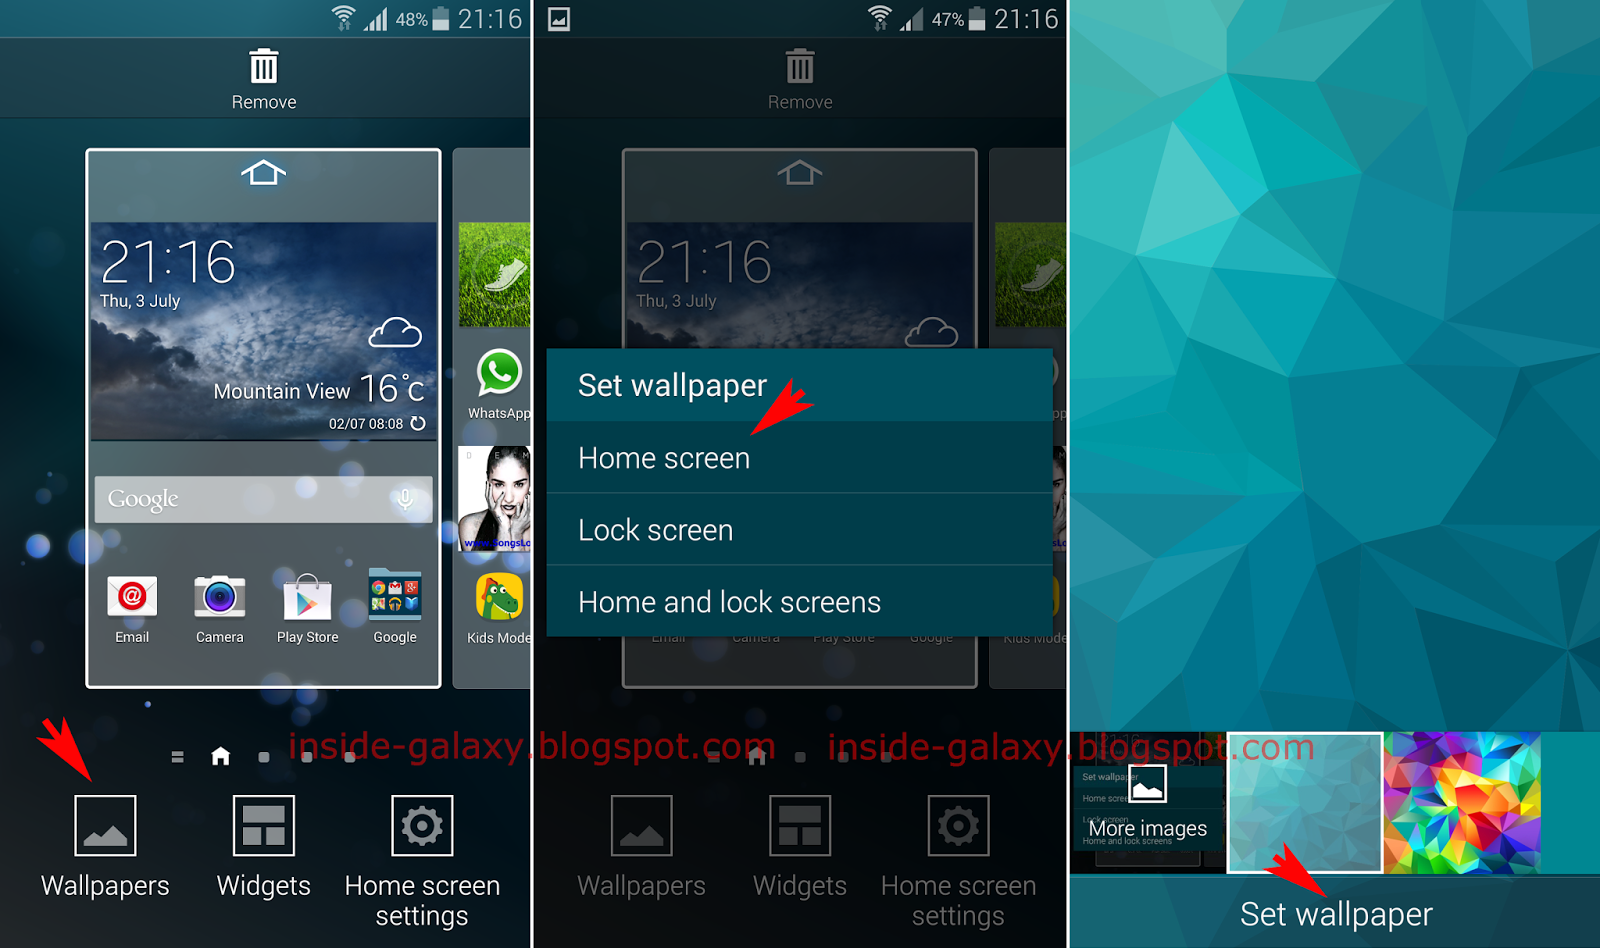 Inside galaxy samsung galaxy s how to change wallpaper in android kitkat